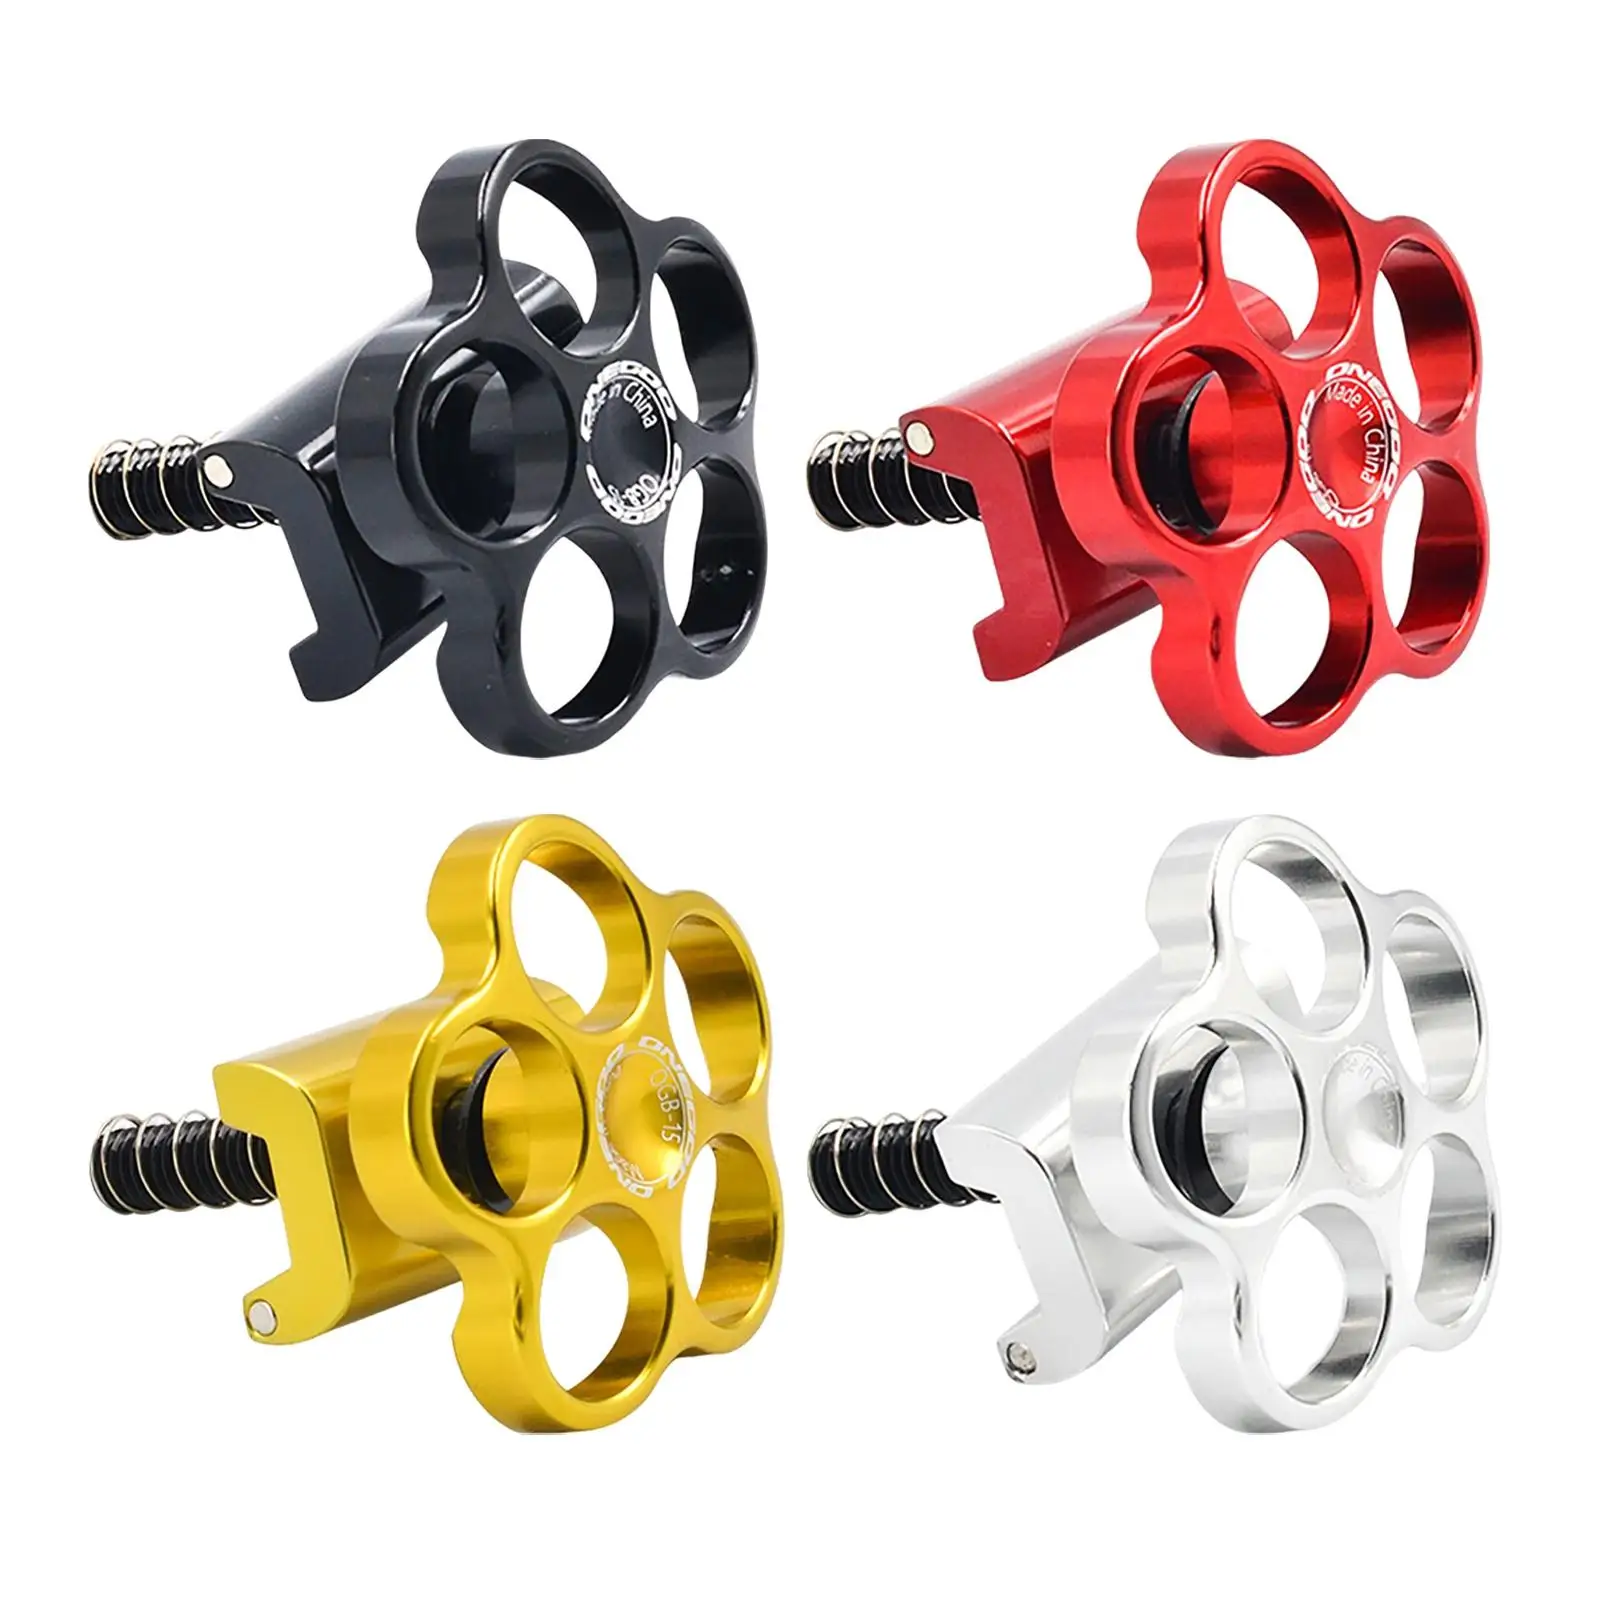 Foldable Bicycle Hinge Clamp Levers Aluminum Alloy Faucet Buckle for Folding Bike Frame